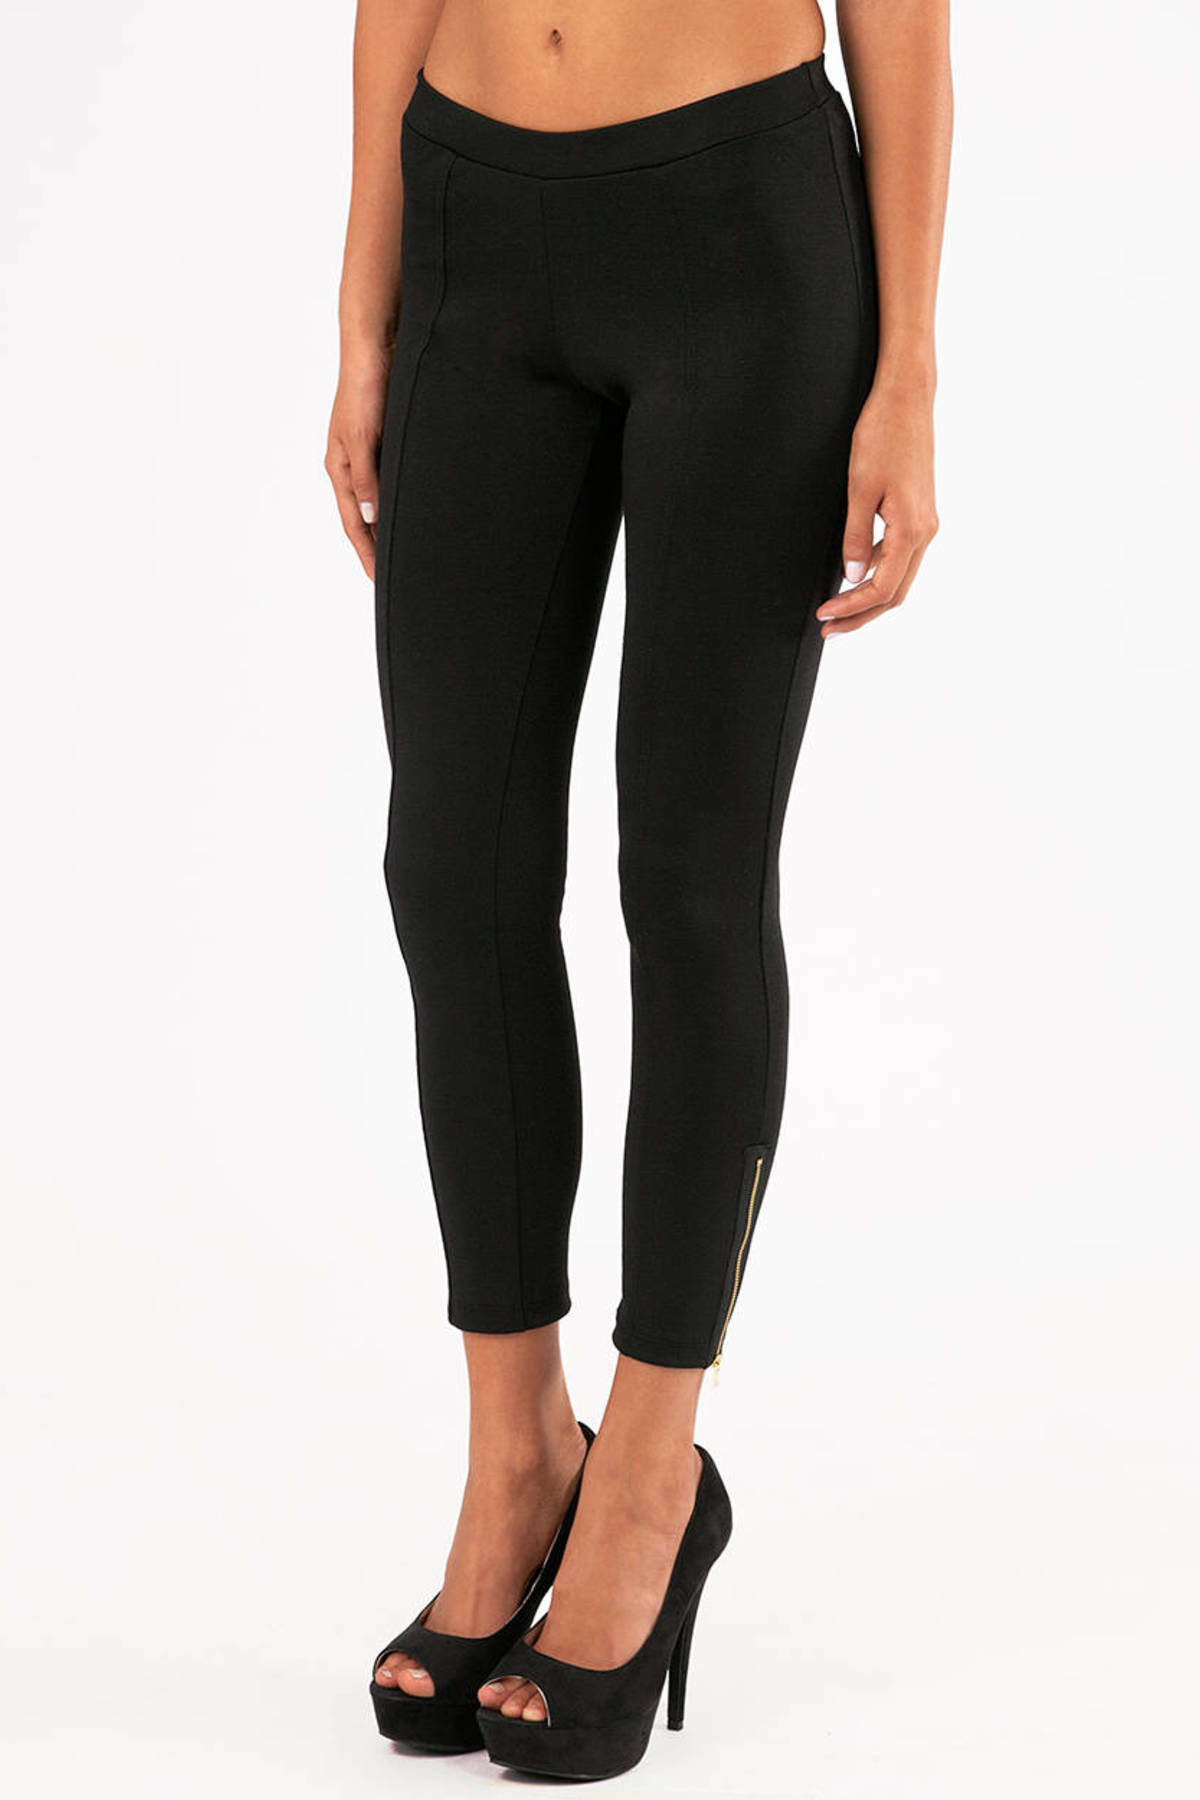 Workout Leggings With Zipper Pockets  International Society of Precision  Agriculture